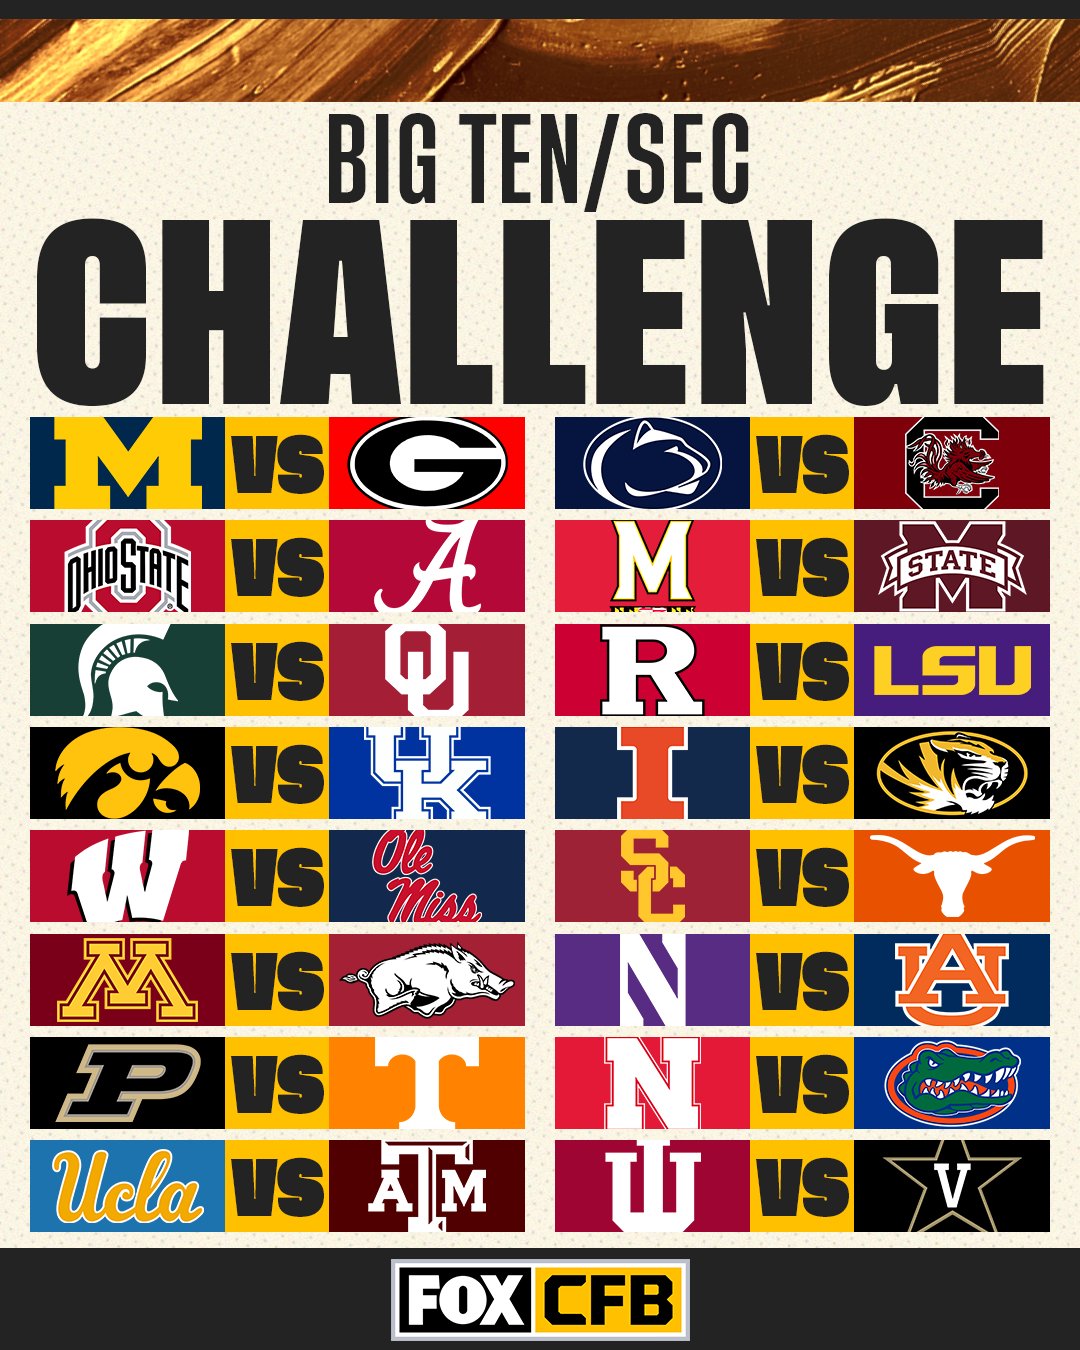 FOX College Football on Twitter "If there was a Big Ten/SEC challenge